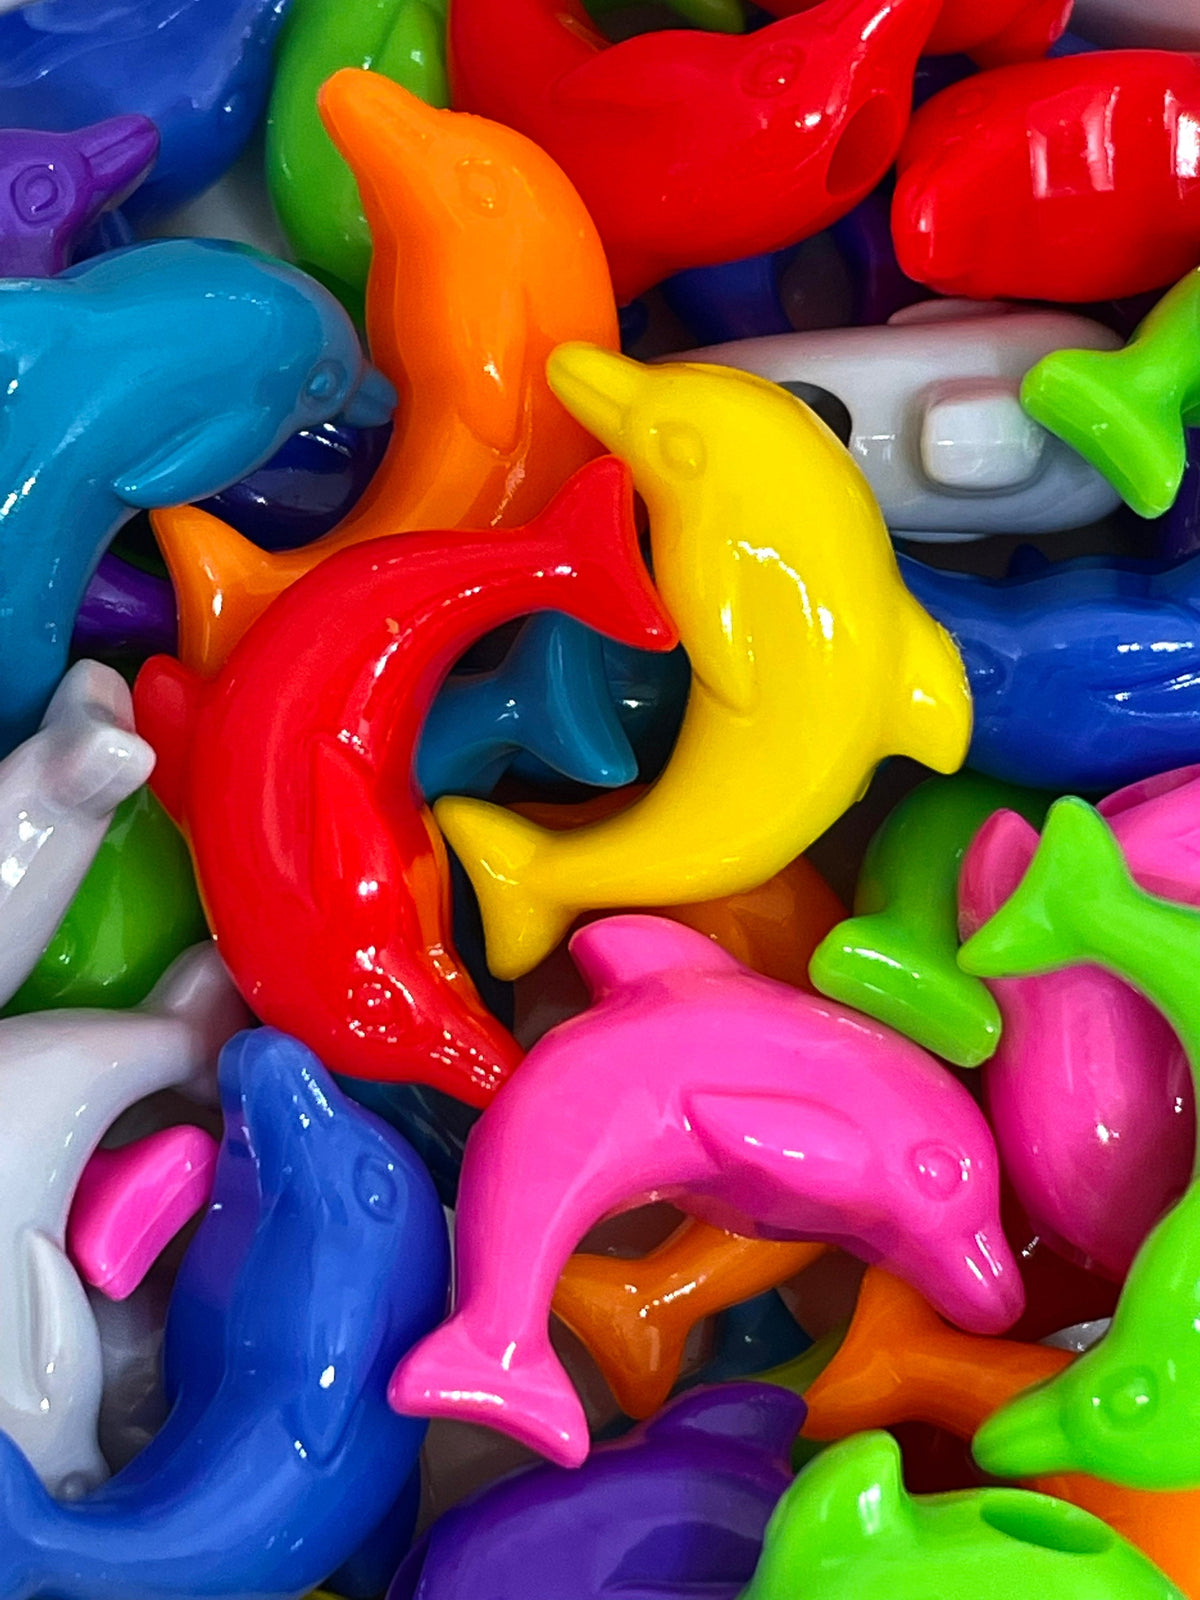 Translucent Rainbow Dolphin Bead Mix for Jewelry Making, Animal Charms